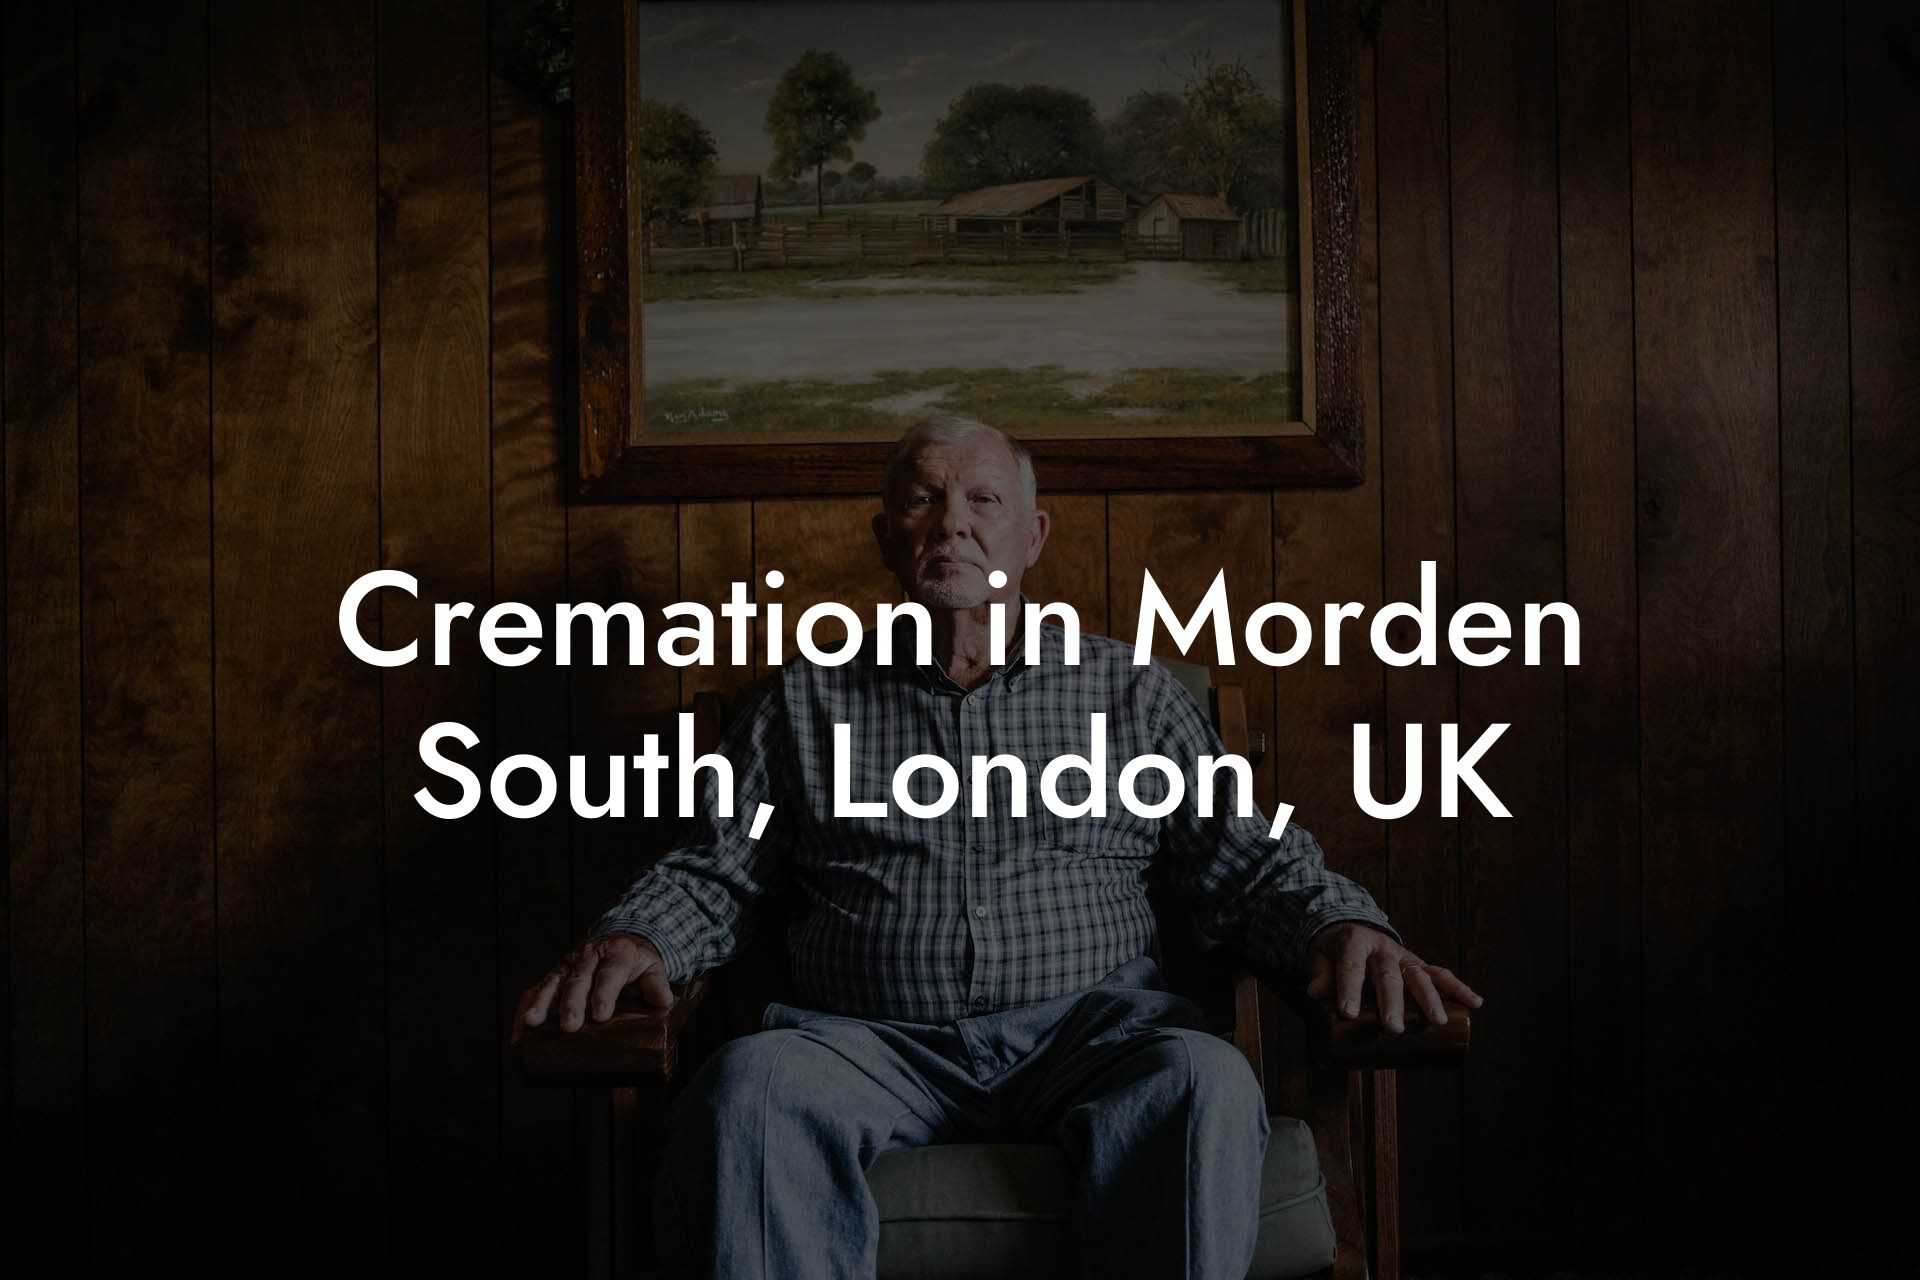 Cremation in Morden South, London, UK